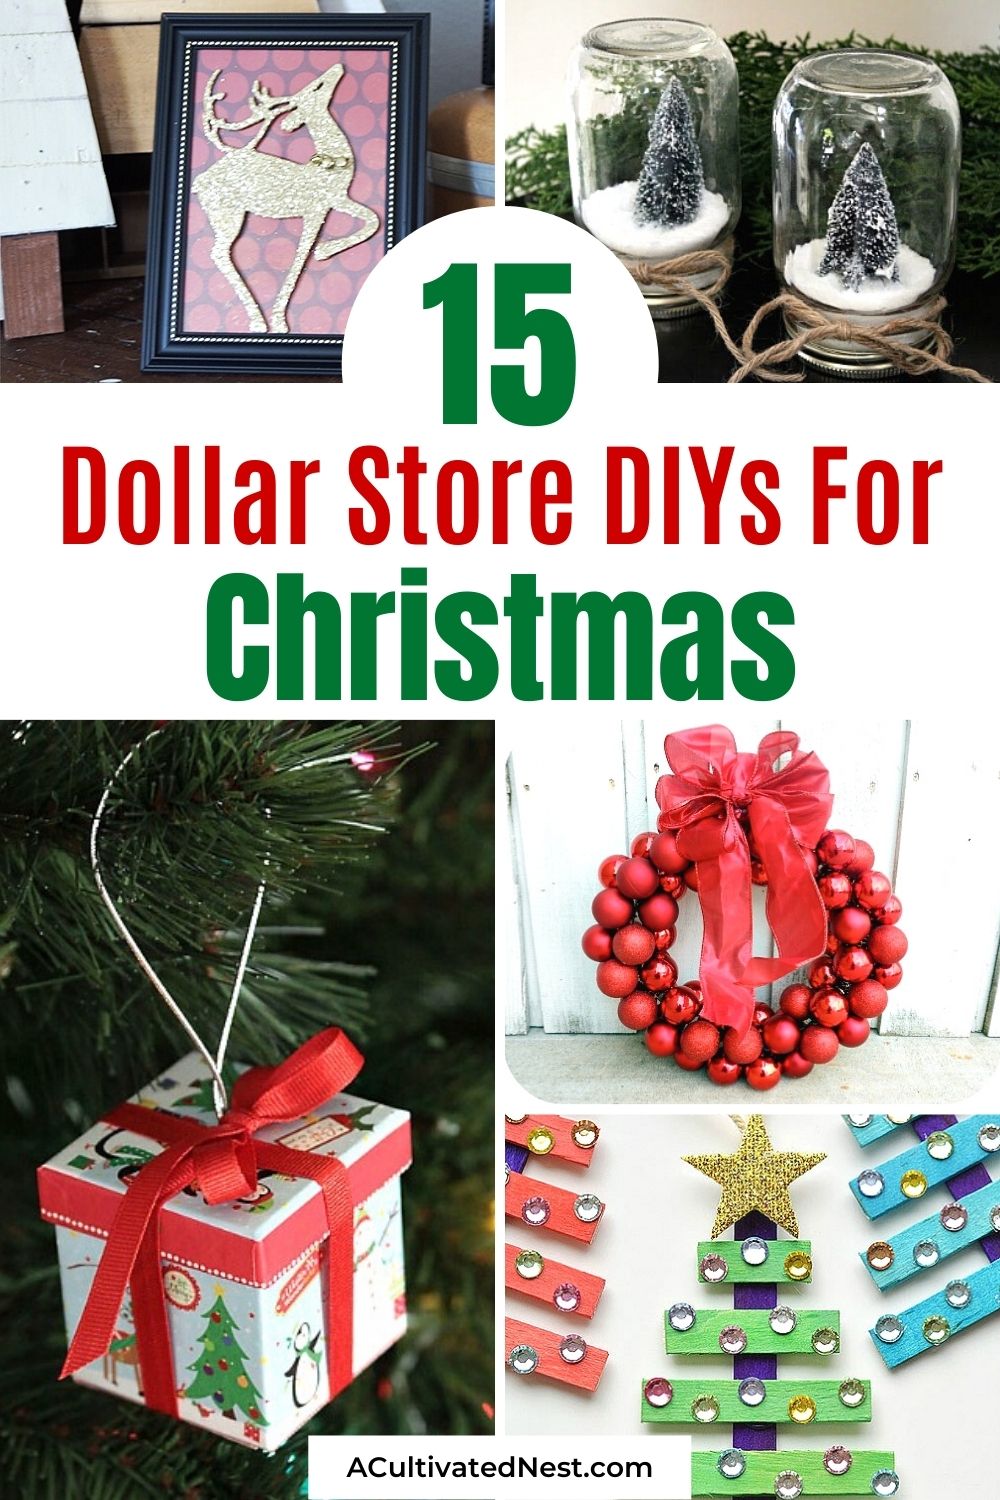 15 Dollar Store Christmas Crafts- Your home can look lovely for Christmas even if you're on a tight budget, with some homemade décor! For inspiration, check out these 15 fun and frugal dollar store Christmas crafts! | #Christmas #ChristmasDIY #crafts #diyProjects #ACultivatedNest